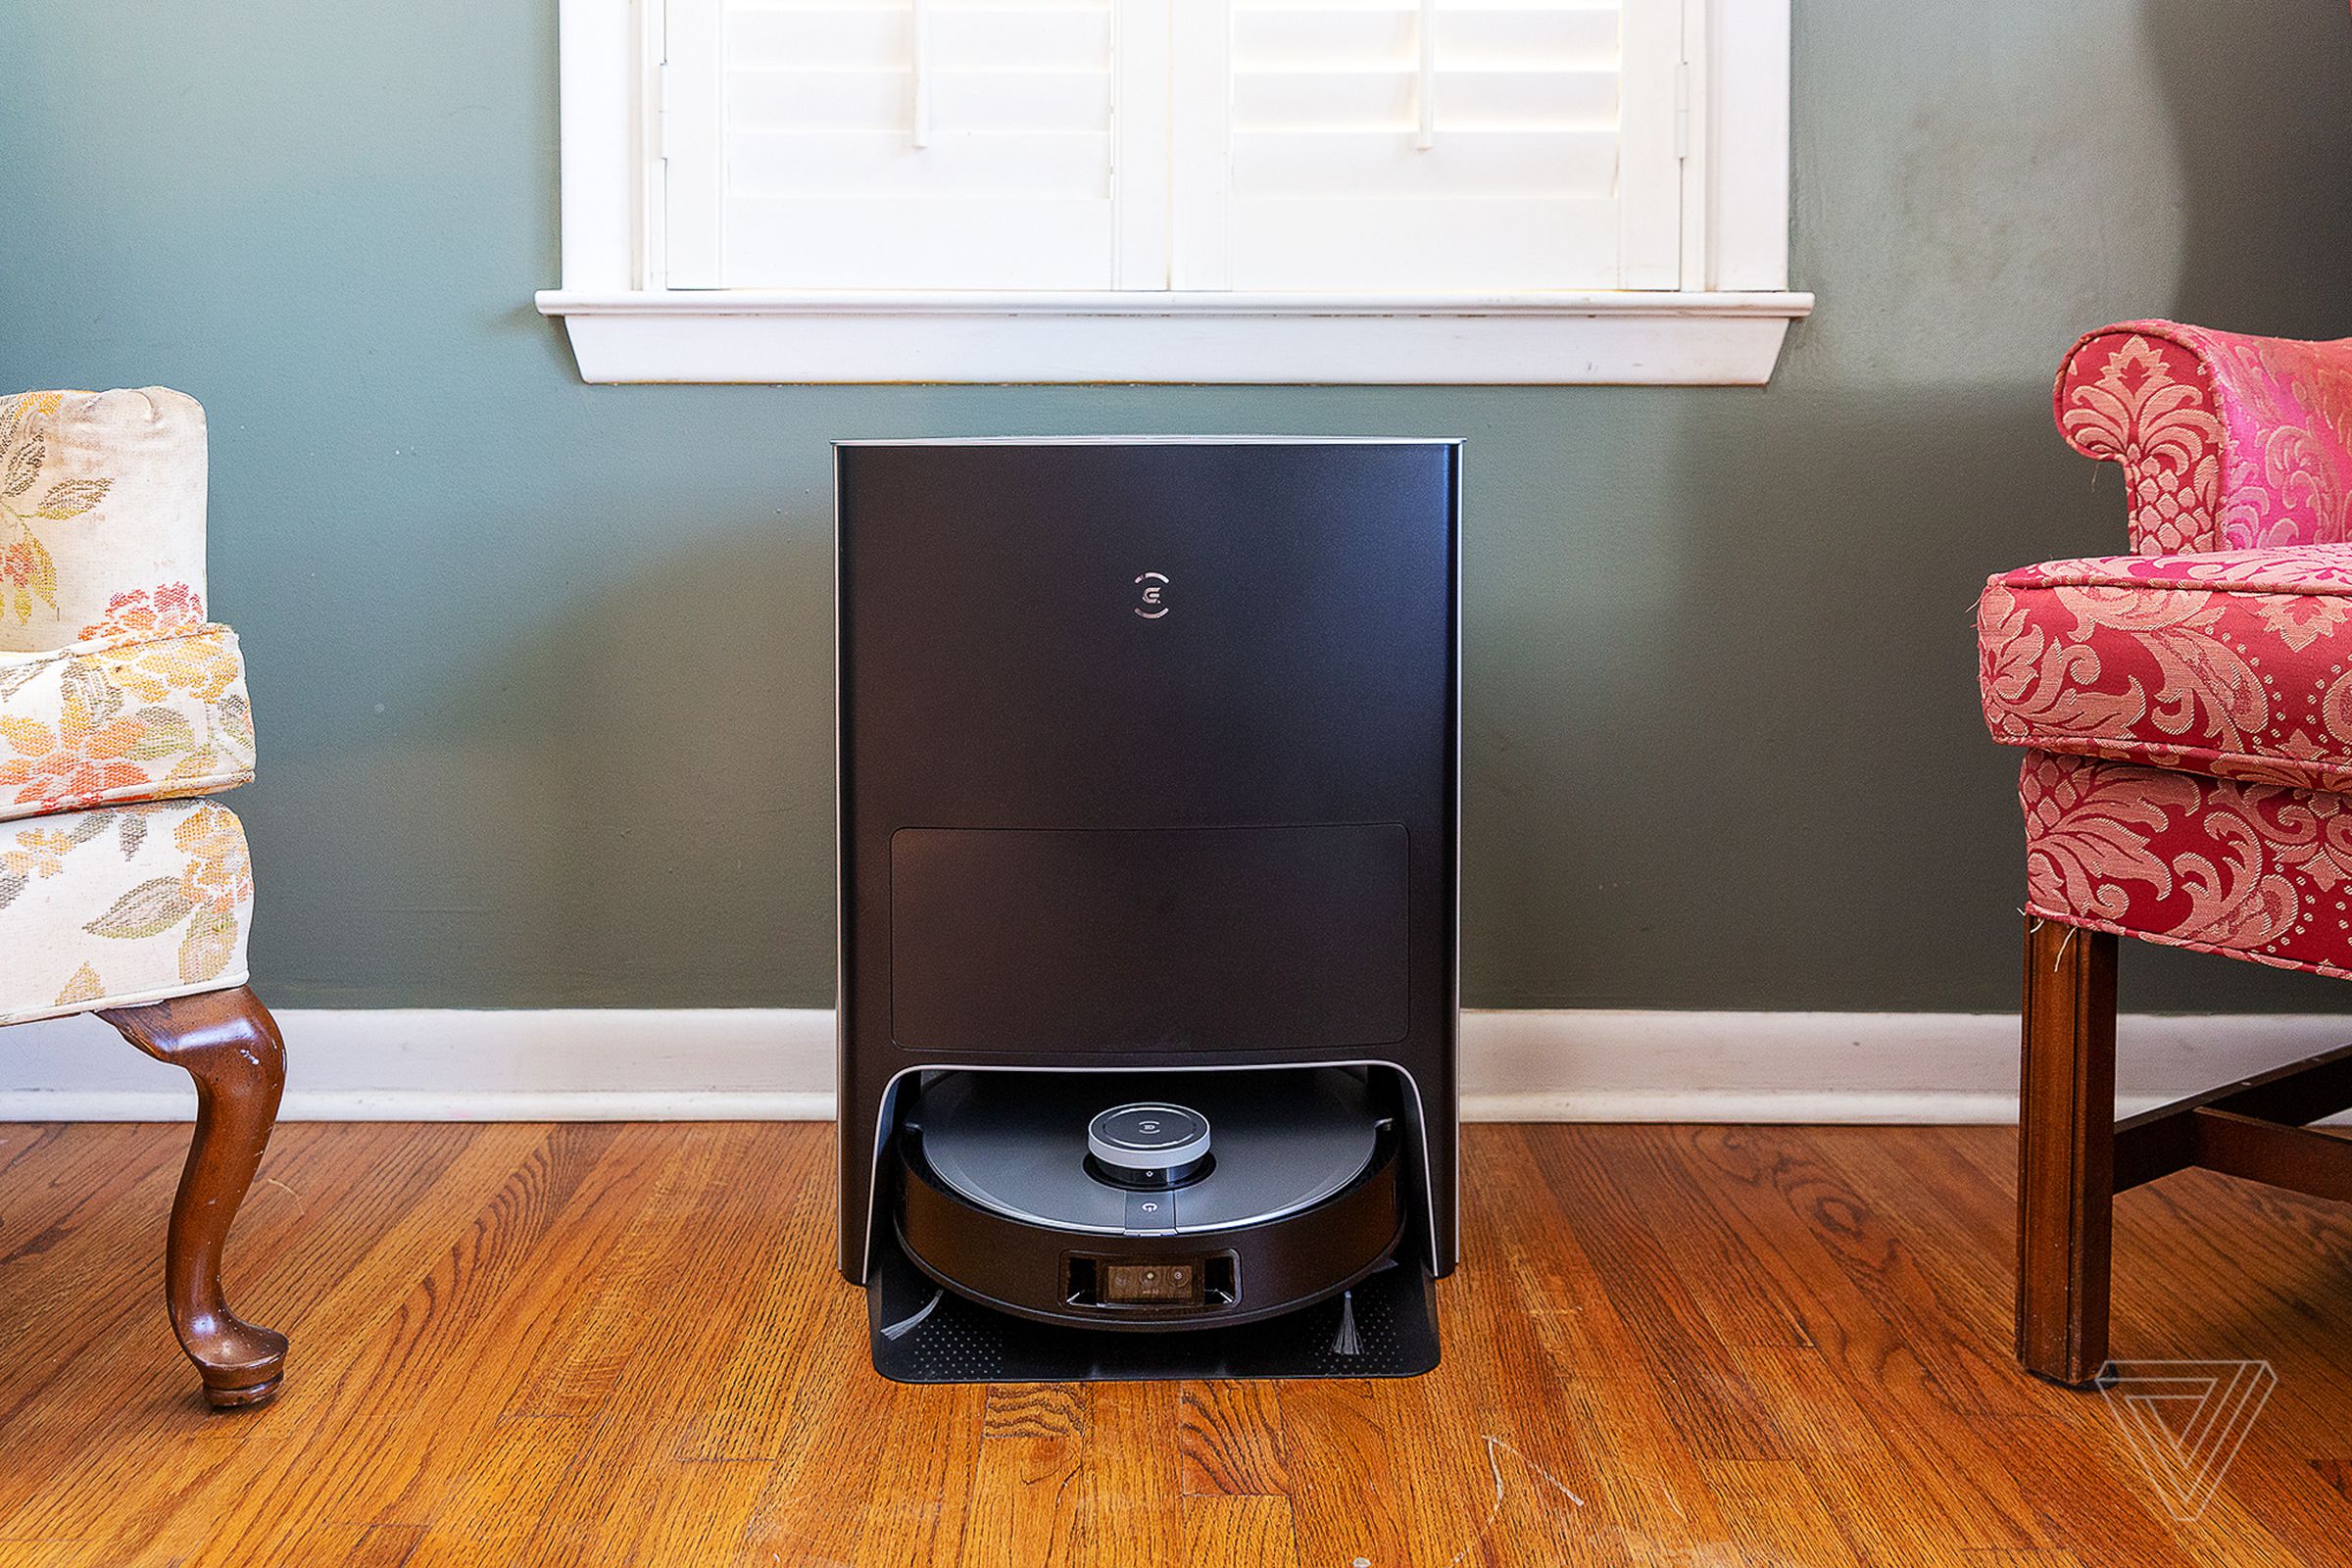 An Ecovacs Deebot X1 Omni robot vacuum, docked in its self-cleaning station in a living room.